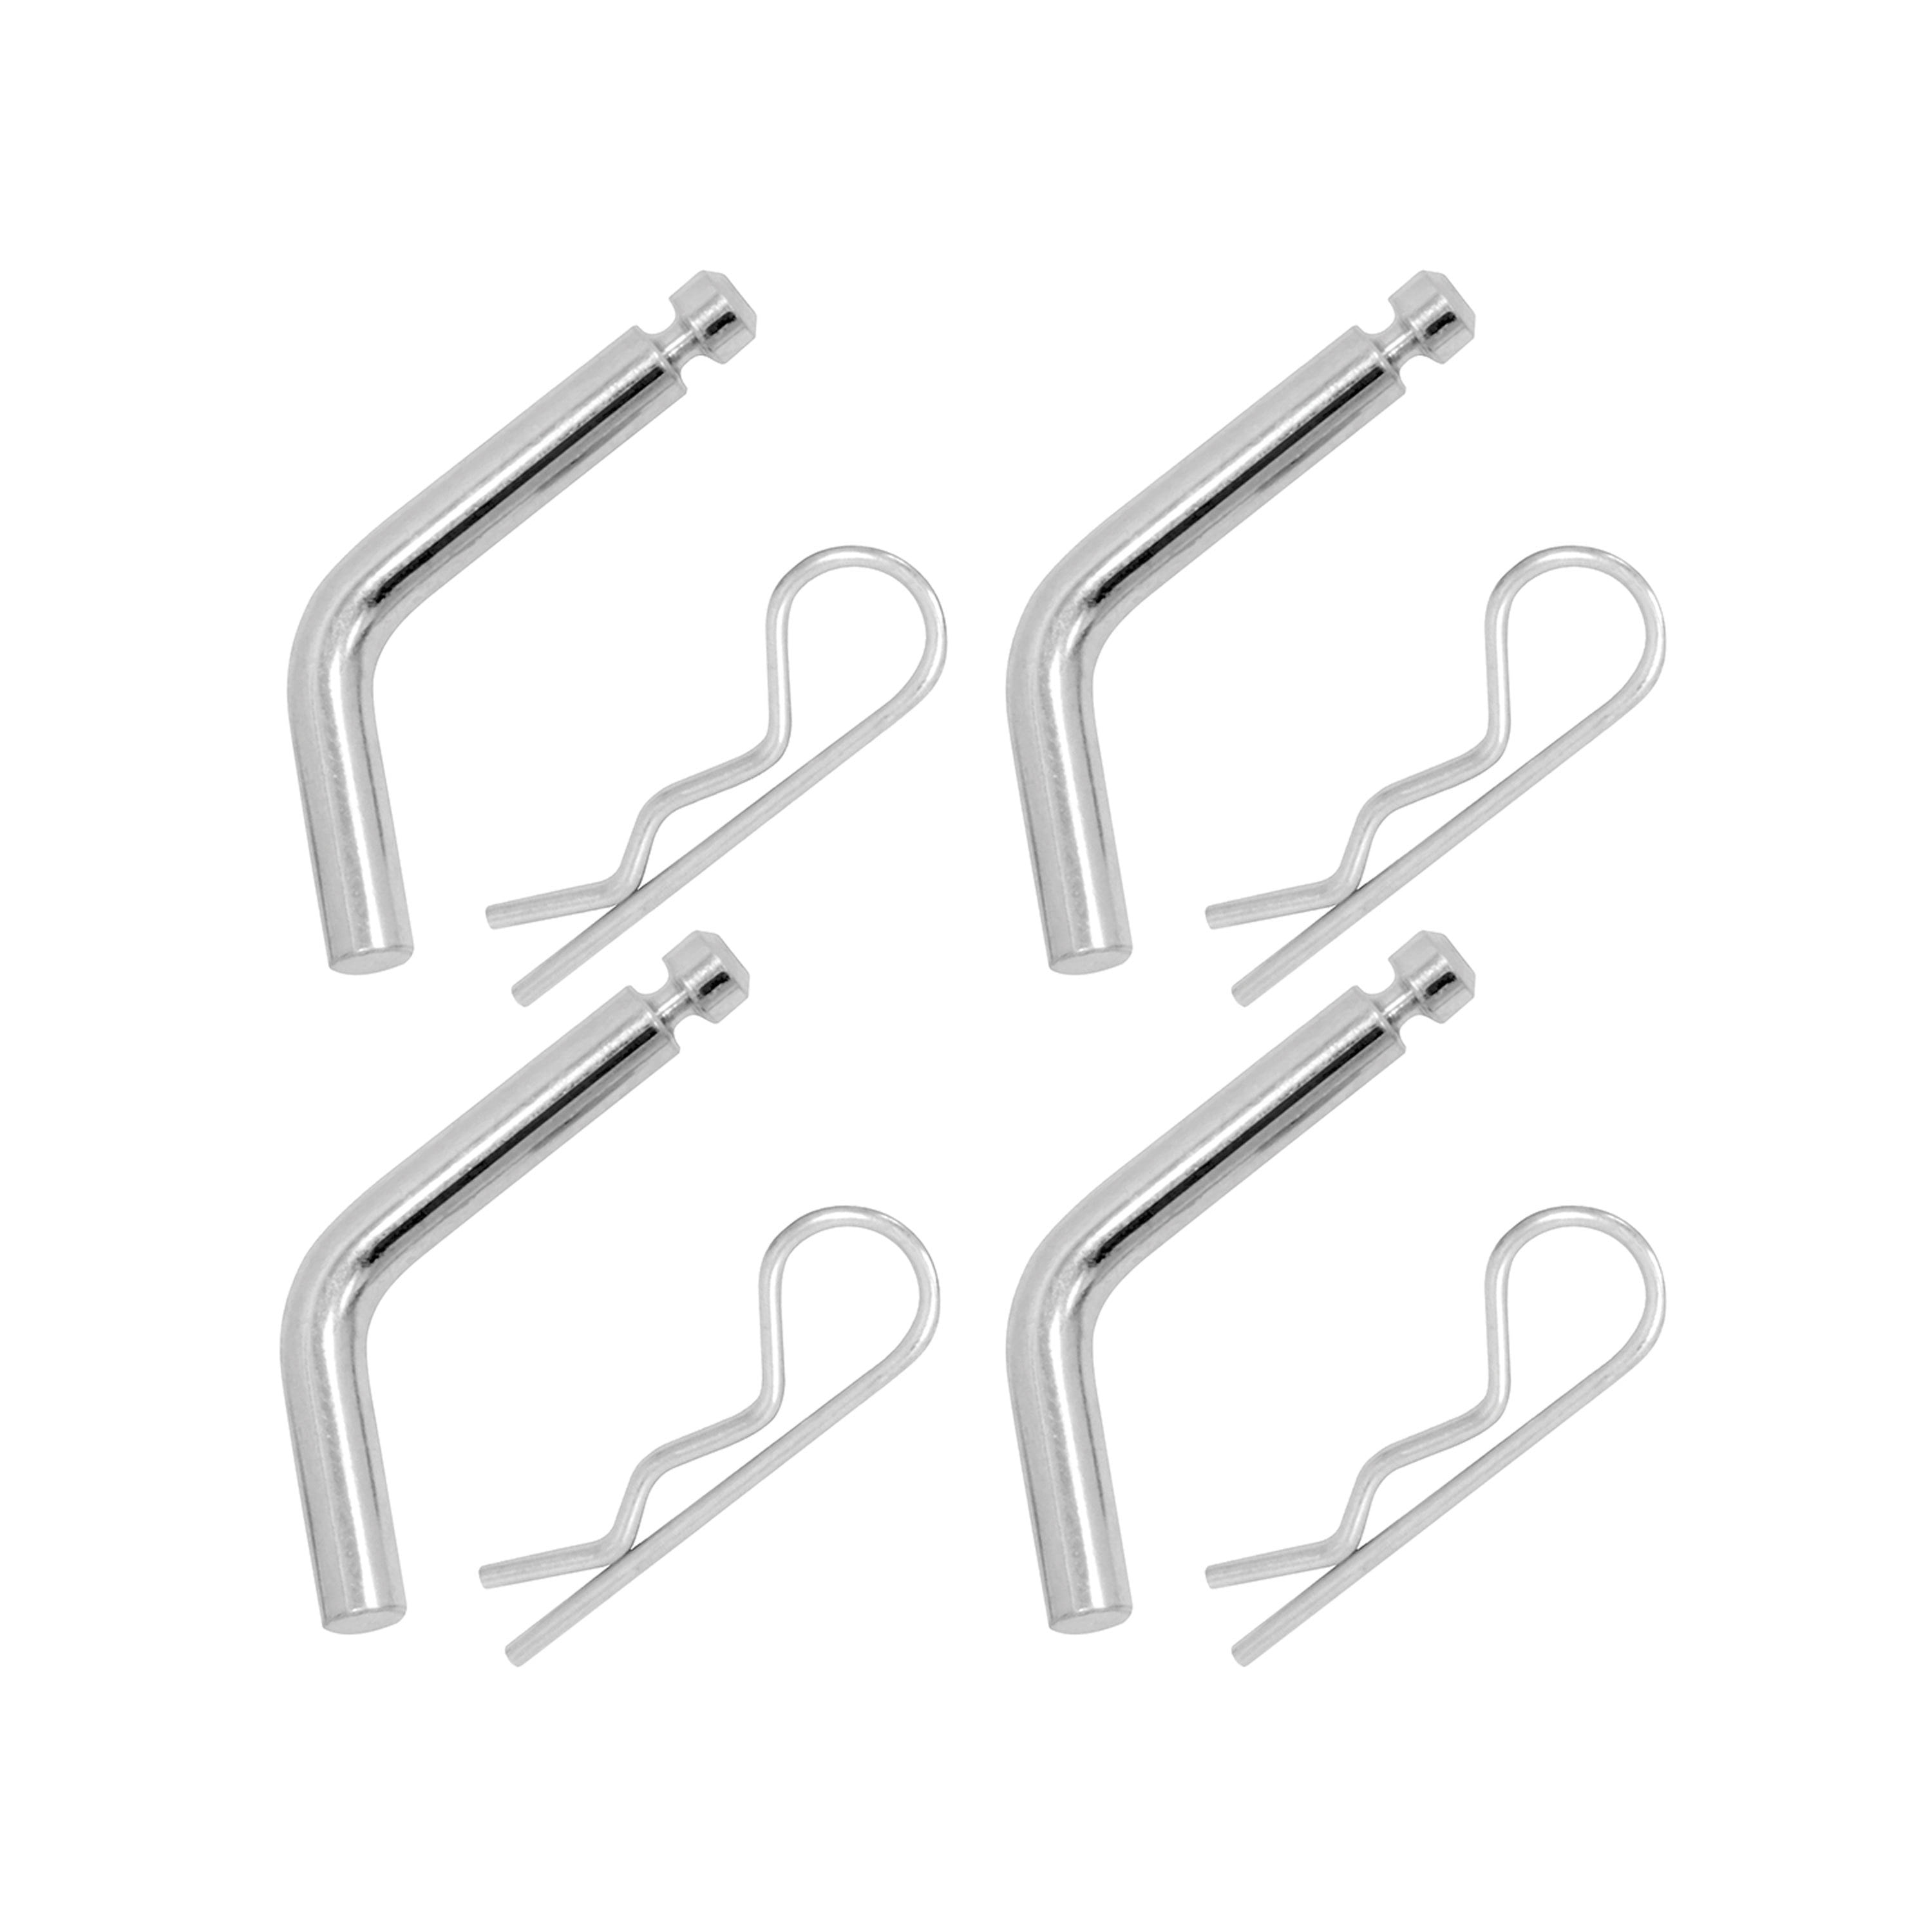 Towever 84546 1/2 Hitch Pin kit for Fifth Wheel Hitch Replacement 